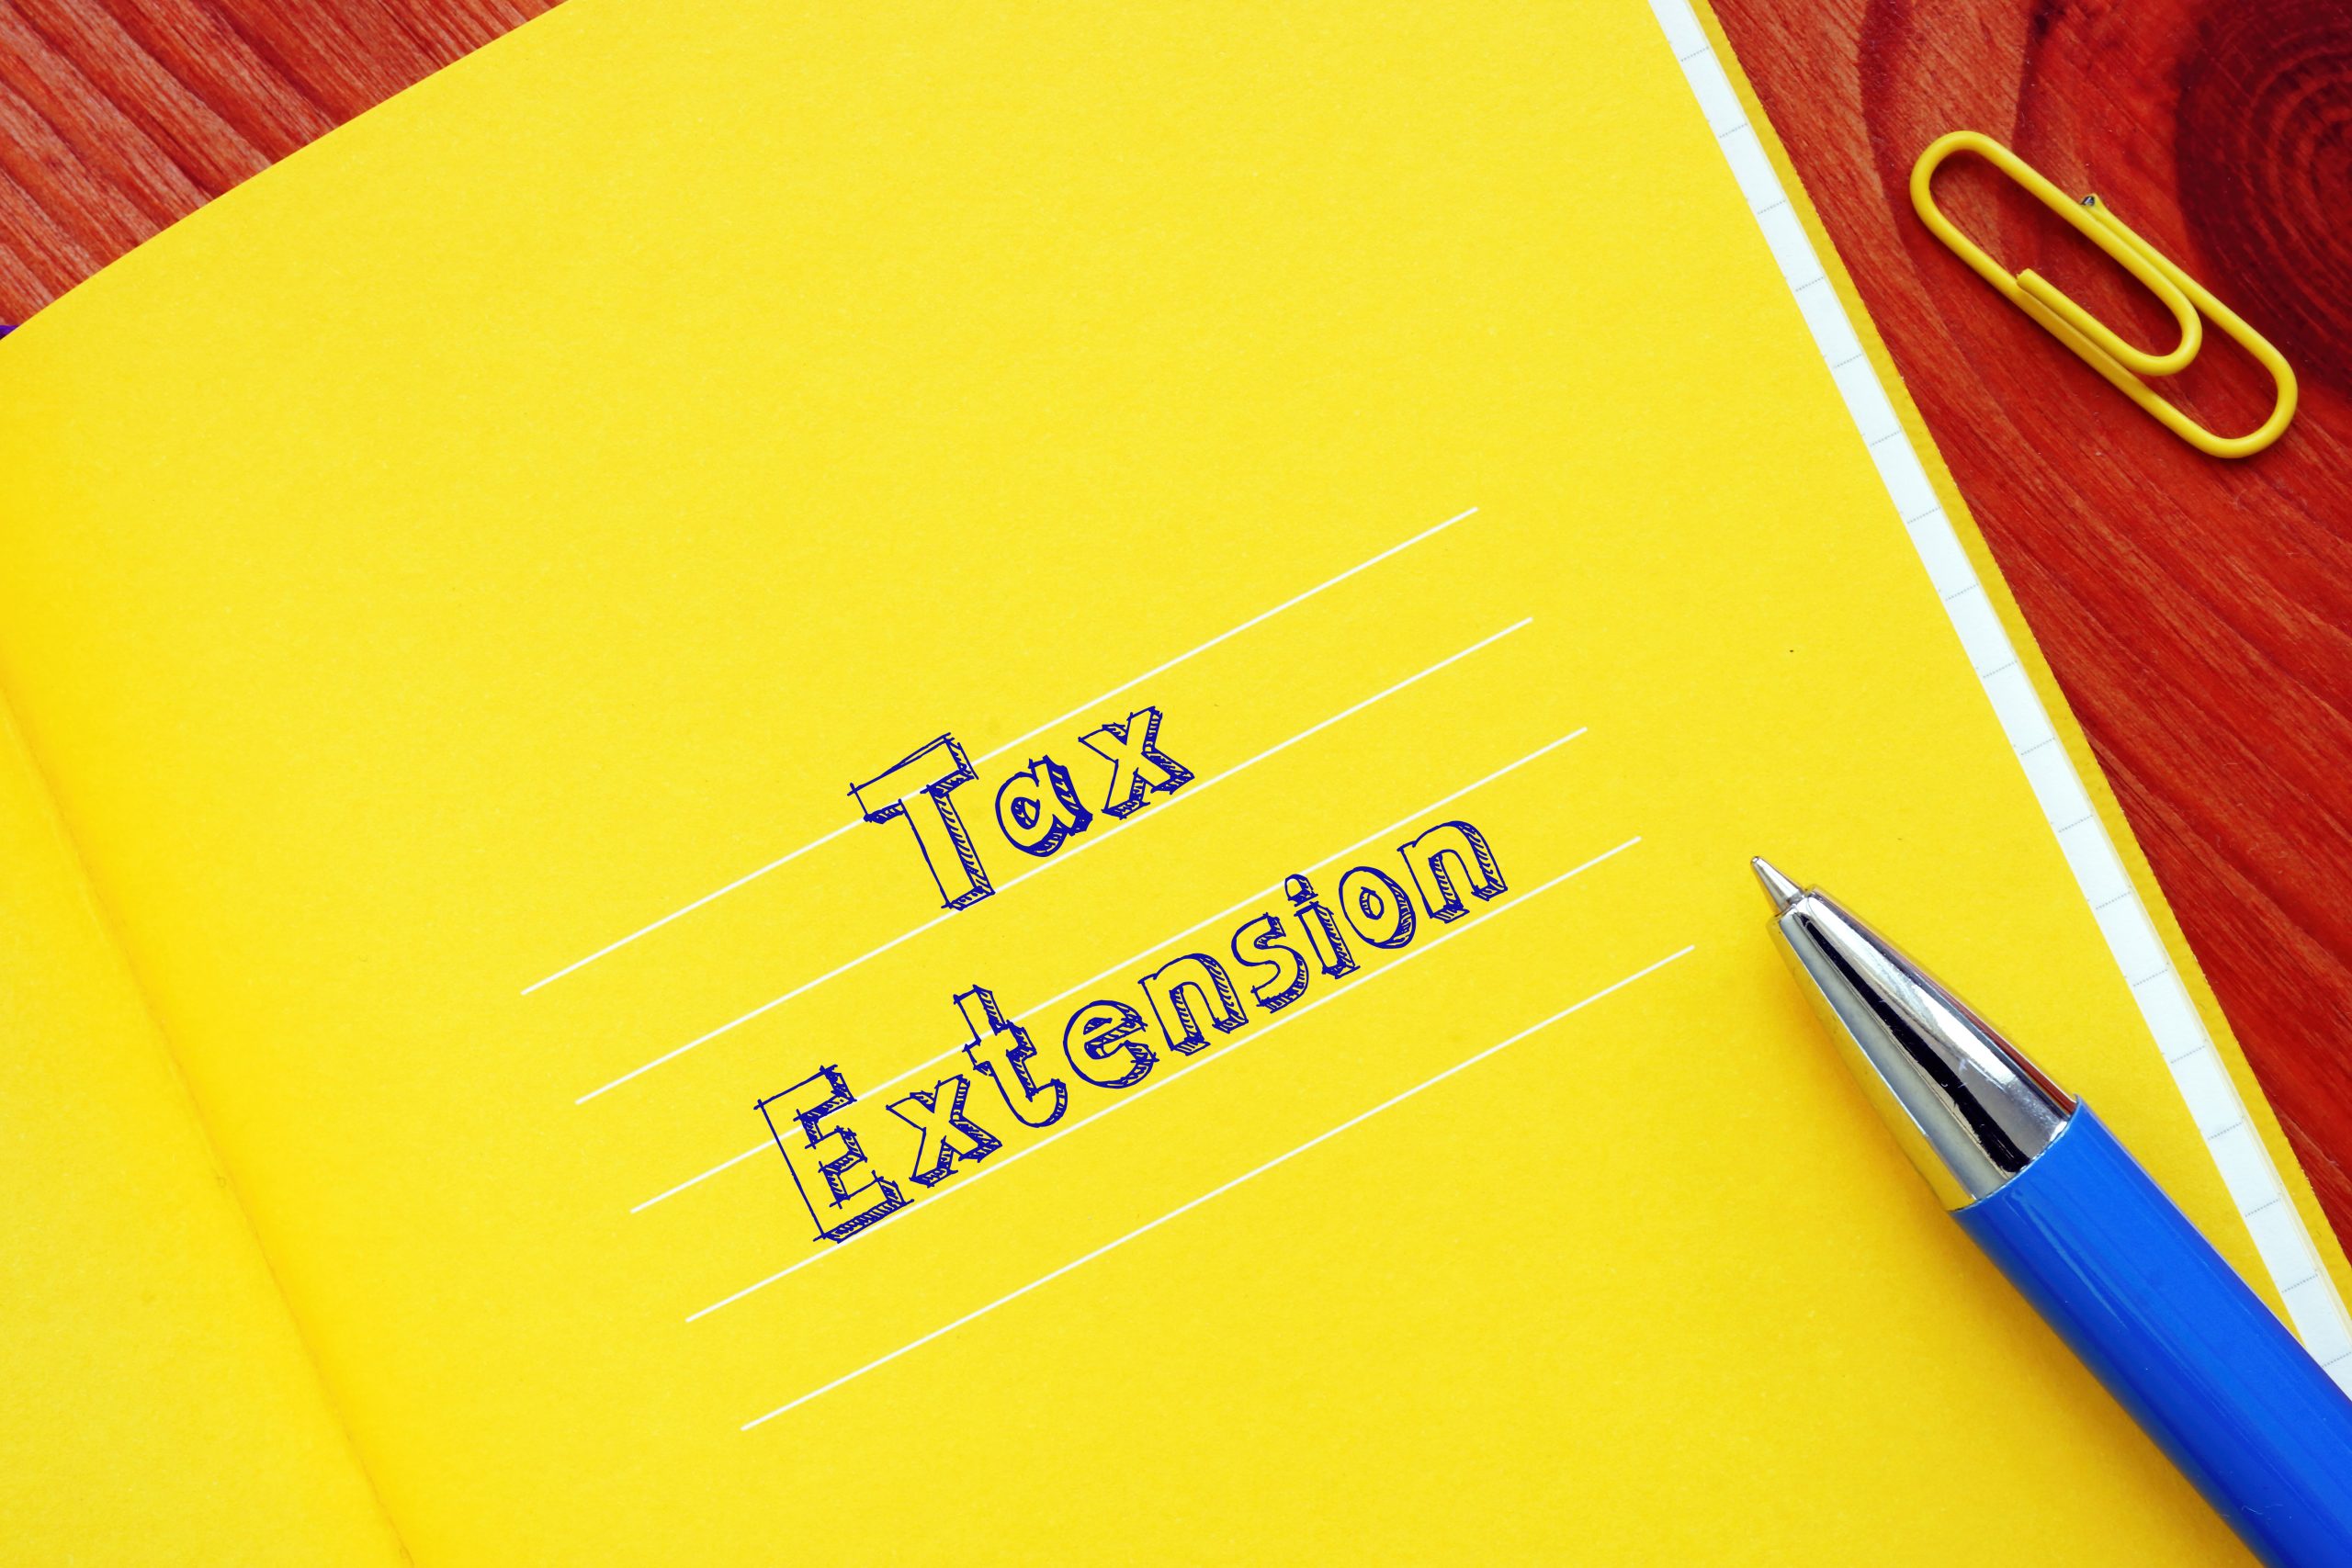 What You Need to File Your Taxes If You Filed an Extension